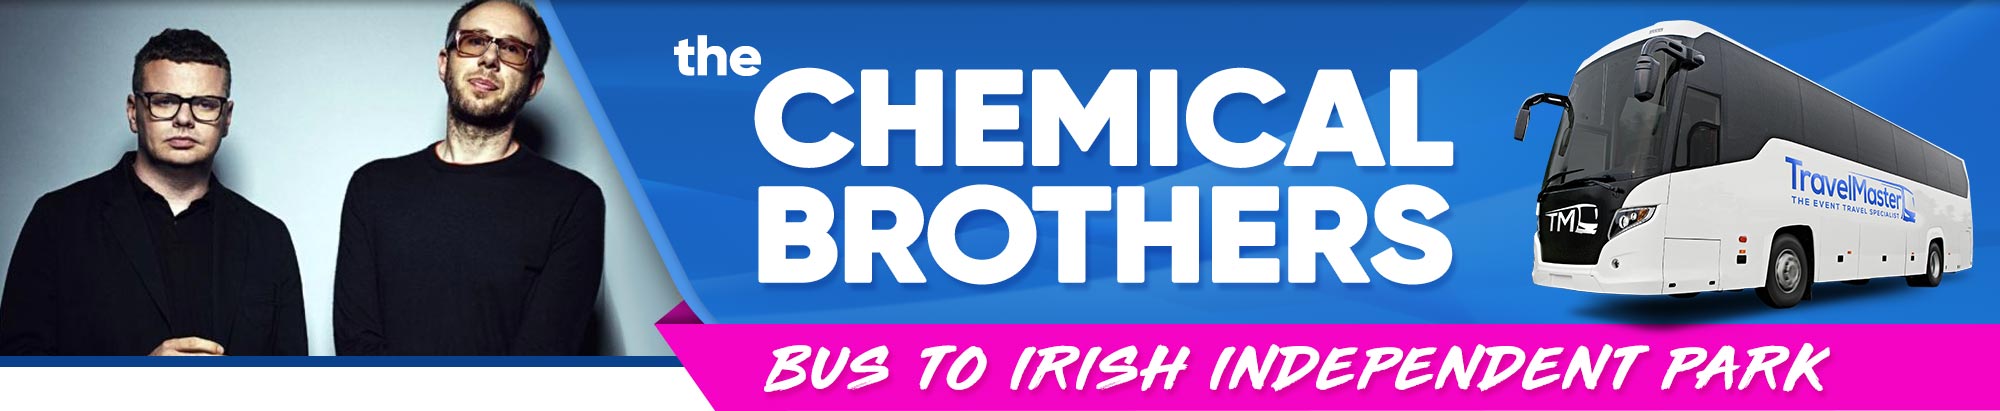 Bus to The Chemical Brothers, Irish Independent Park | Nationwide | 30 Jun 2020